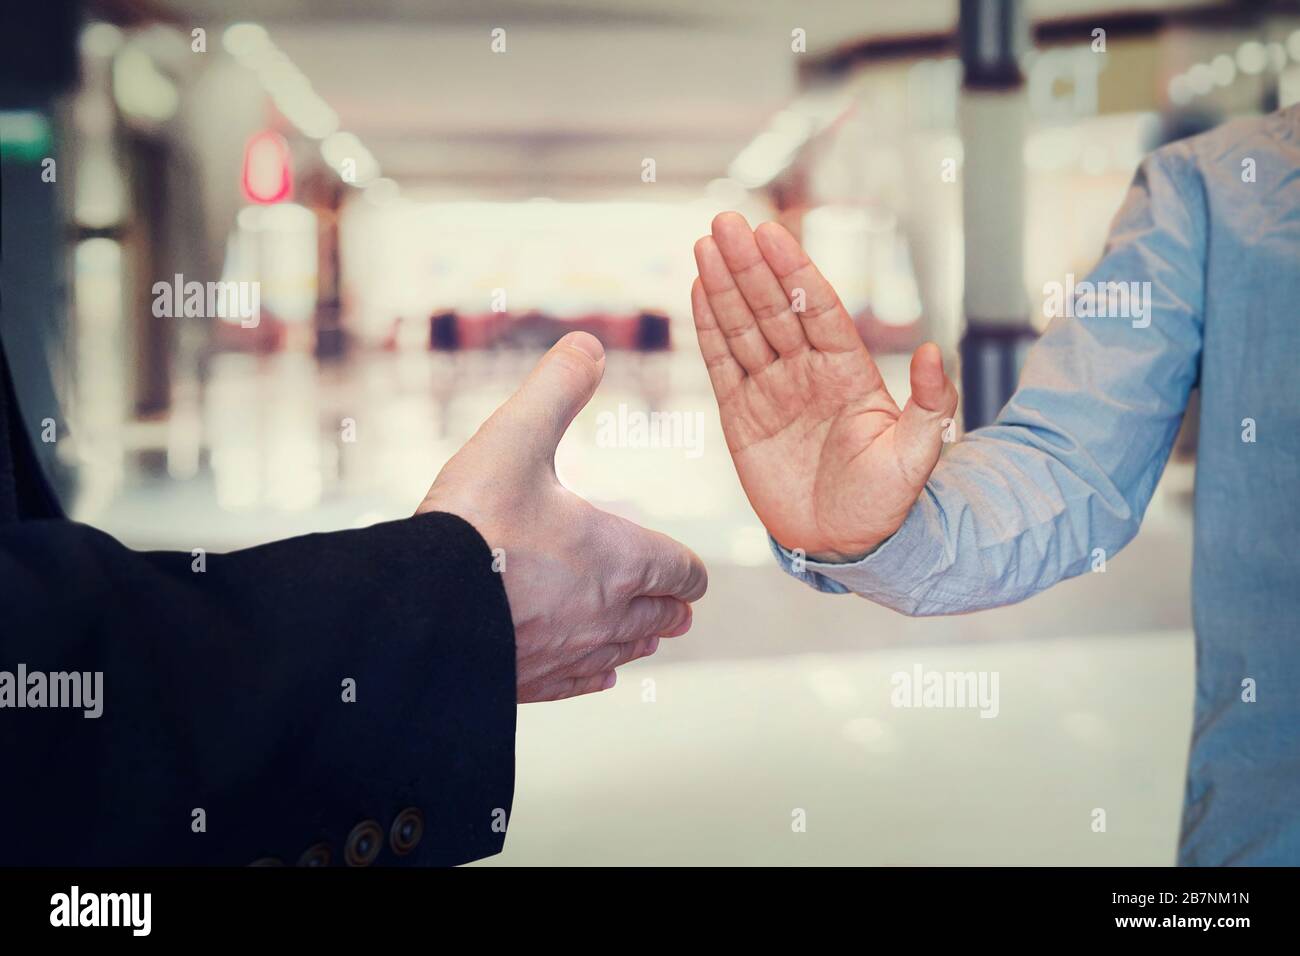 man refusing hand shake with her friend to protect herself from coronavirus in public areas. Prevention of fight against pandemic. Non-contact greetin Stock Photo